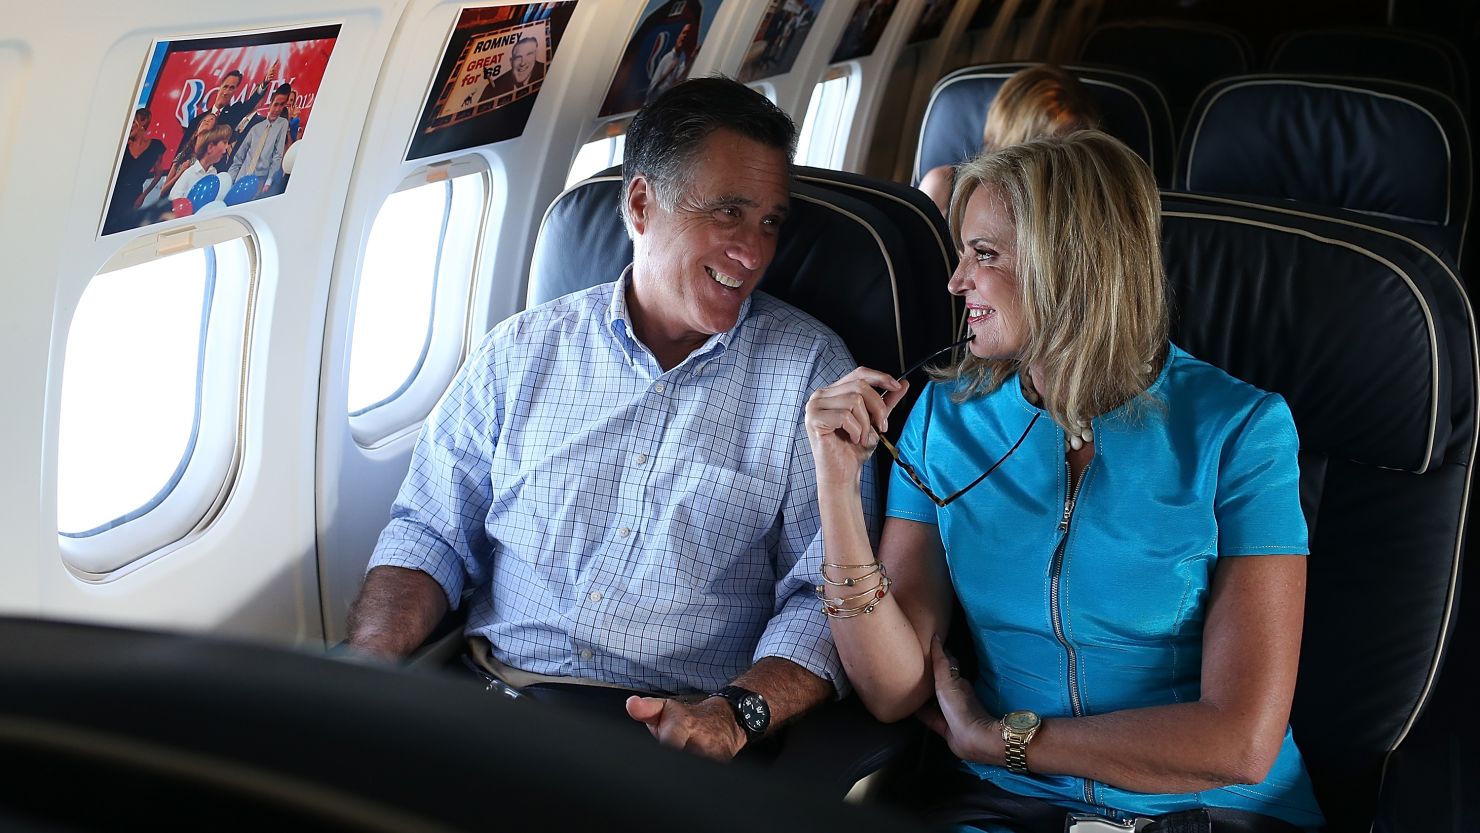 Mitt Romney likely sees benefits for regular folk as "gifts," but tax breaks for those like him and wife  Ann aren't, the writer says.